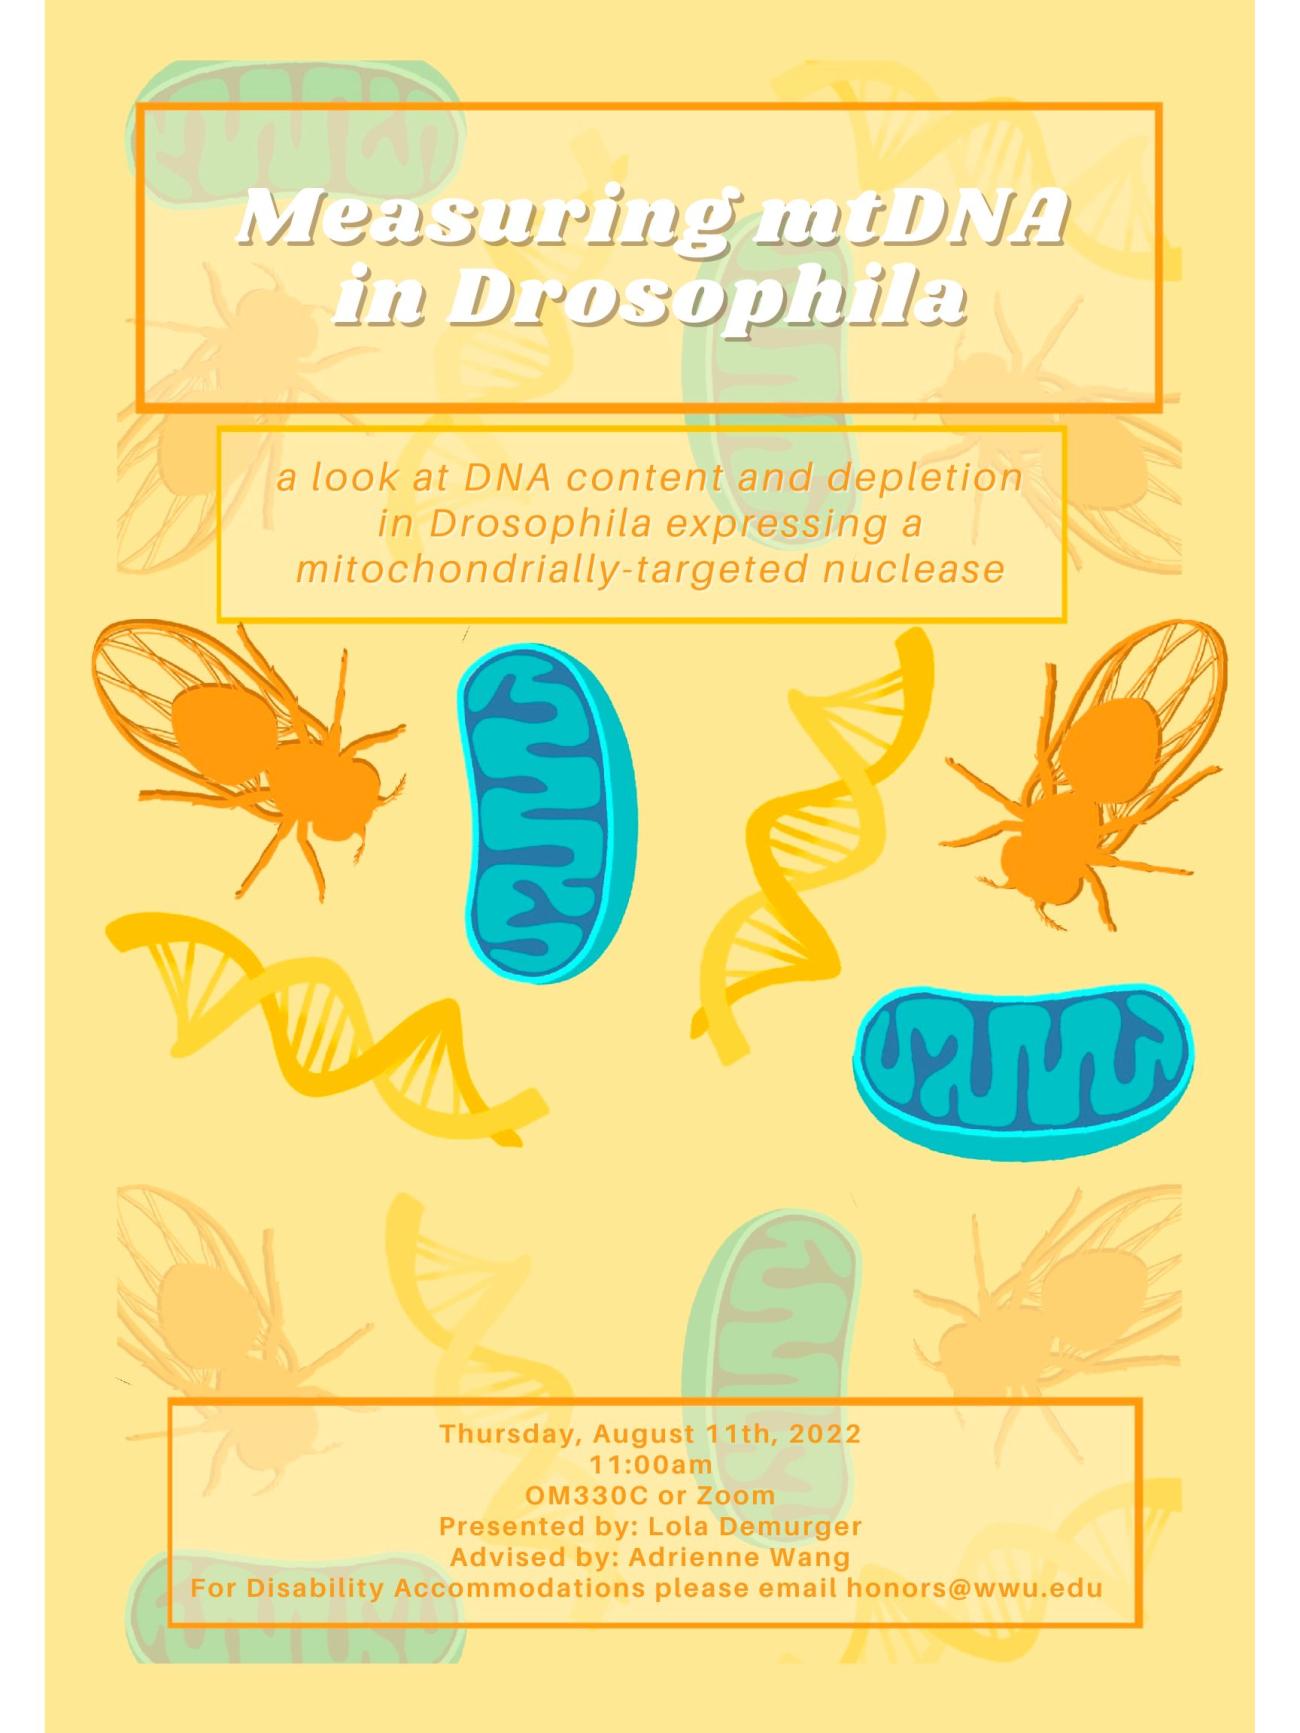 Poster background is yellow with a pattern of blue mitochondria, yellow DNA helices, and orange fruit flies. Main title at the top reads “measuring mtDNA in Drosophila”, and subtitle right below it reads “a look at DNA content and depletion in Drosophila expressing a mitochondrially-targeted nuclease”, at the bottom it reads “Thursday, August 11th 2022, 11:00am OM330C or Zoom Presented by: Lola Demurger advised by: Adrienne Wang for disability accomodations please email honors@wwu.edu.”